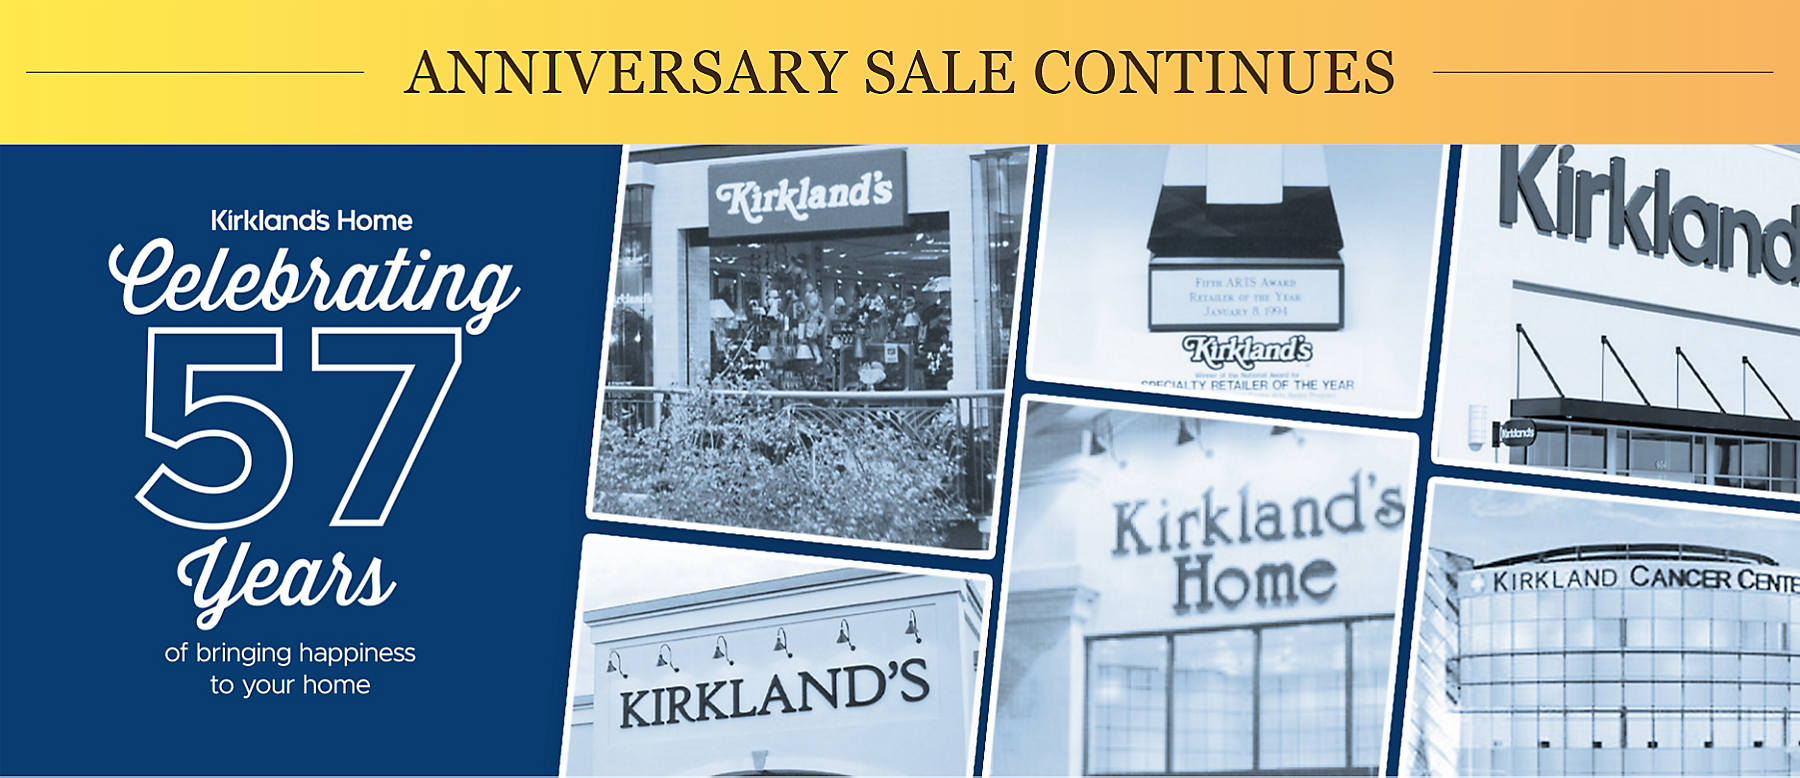 Anniversary Sale Continues Kirkland's Home Celebrating 57 Years of bringing happiness to your home